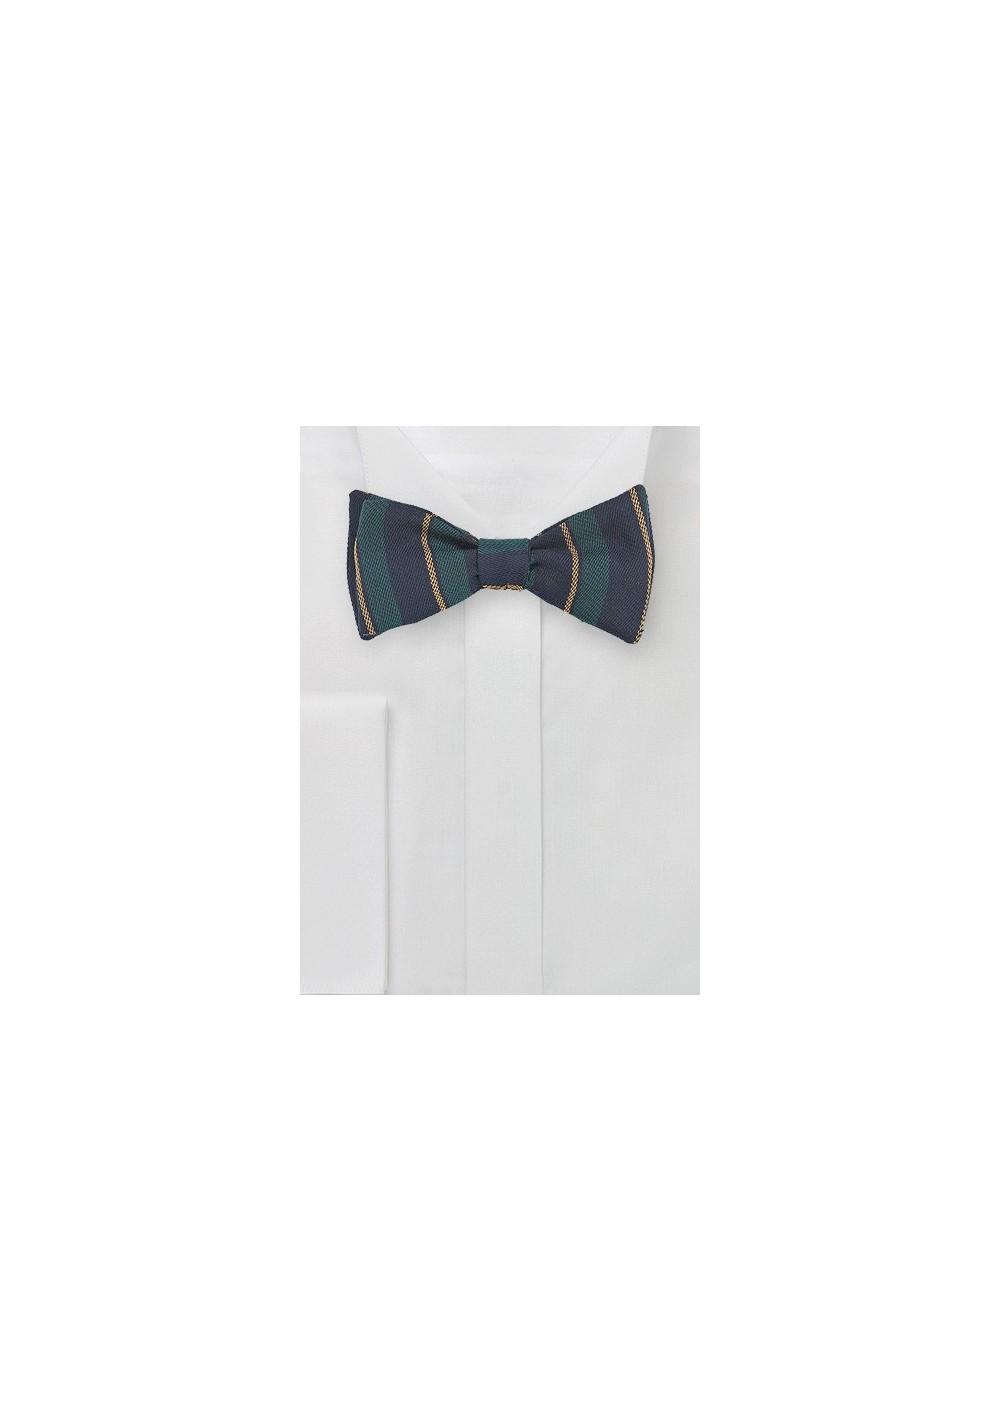 Winter Wool Bow Tie in Hunter Green and Navy